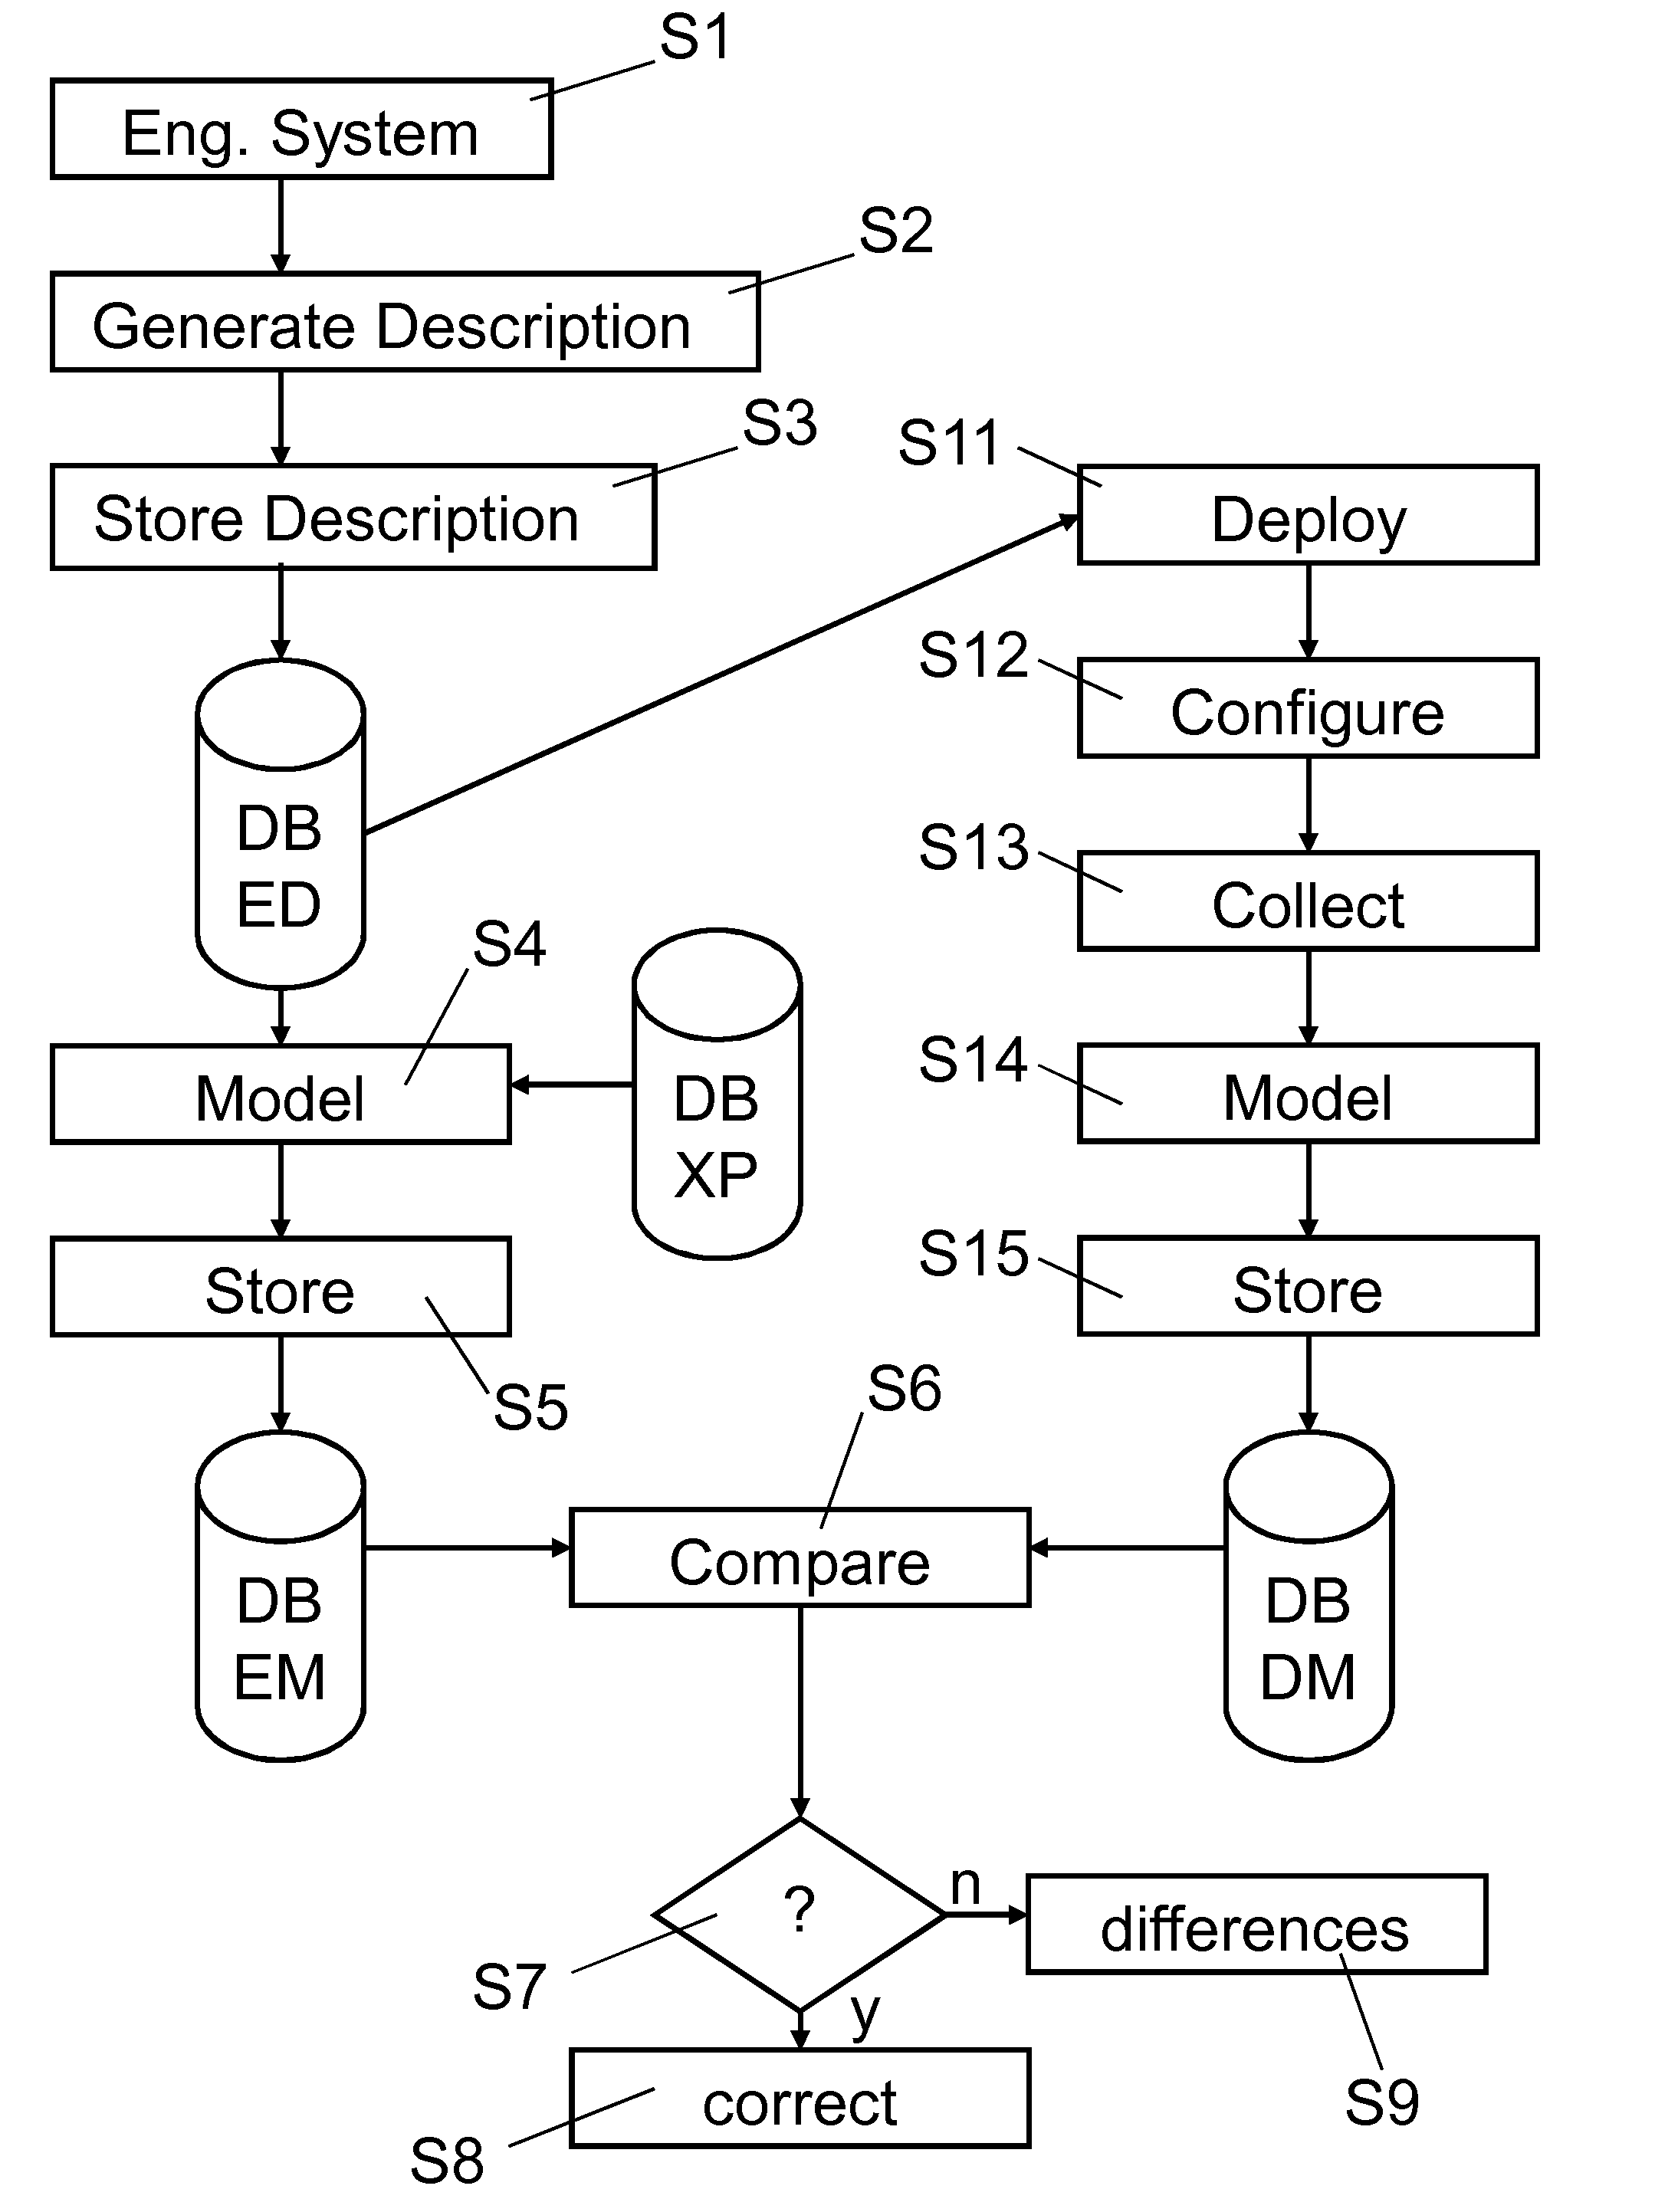 Validation of a communication network of an industrial automation and control system